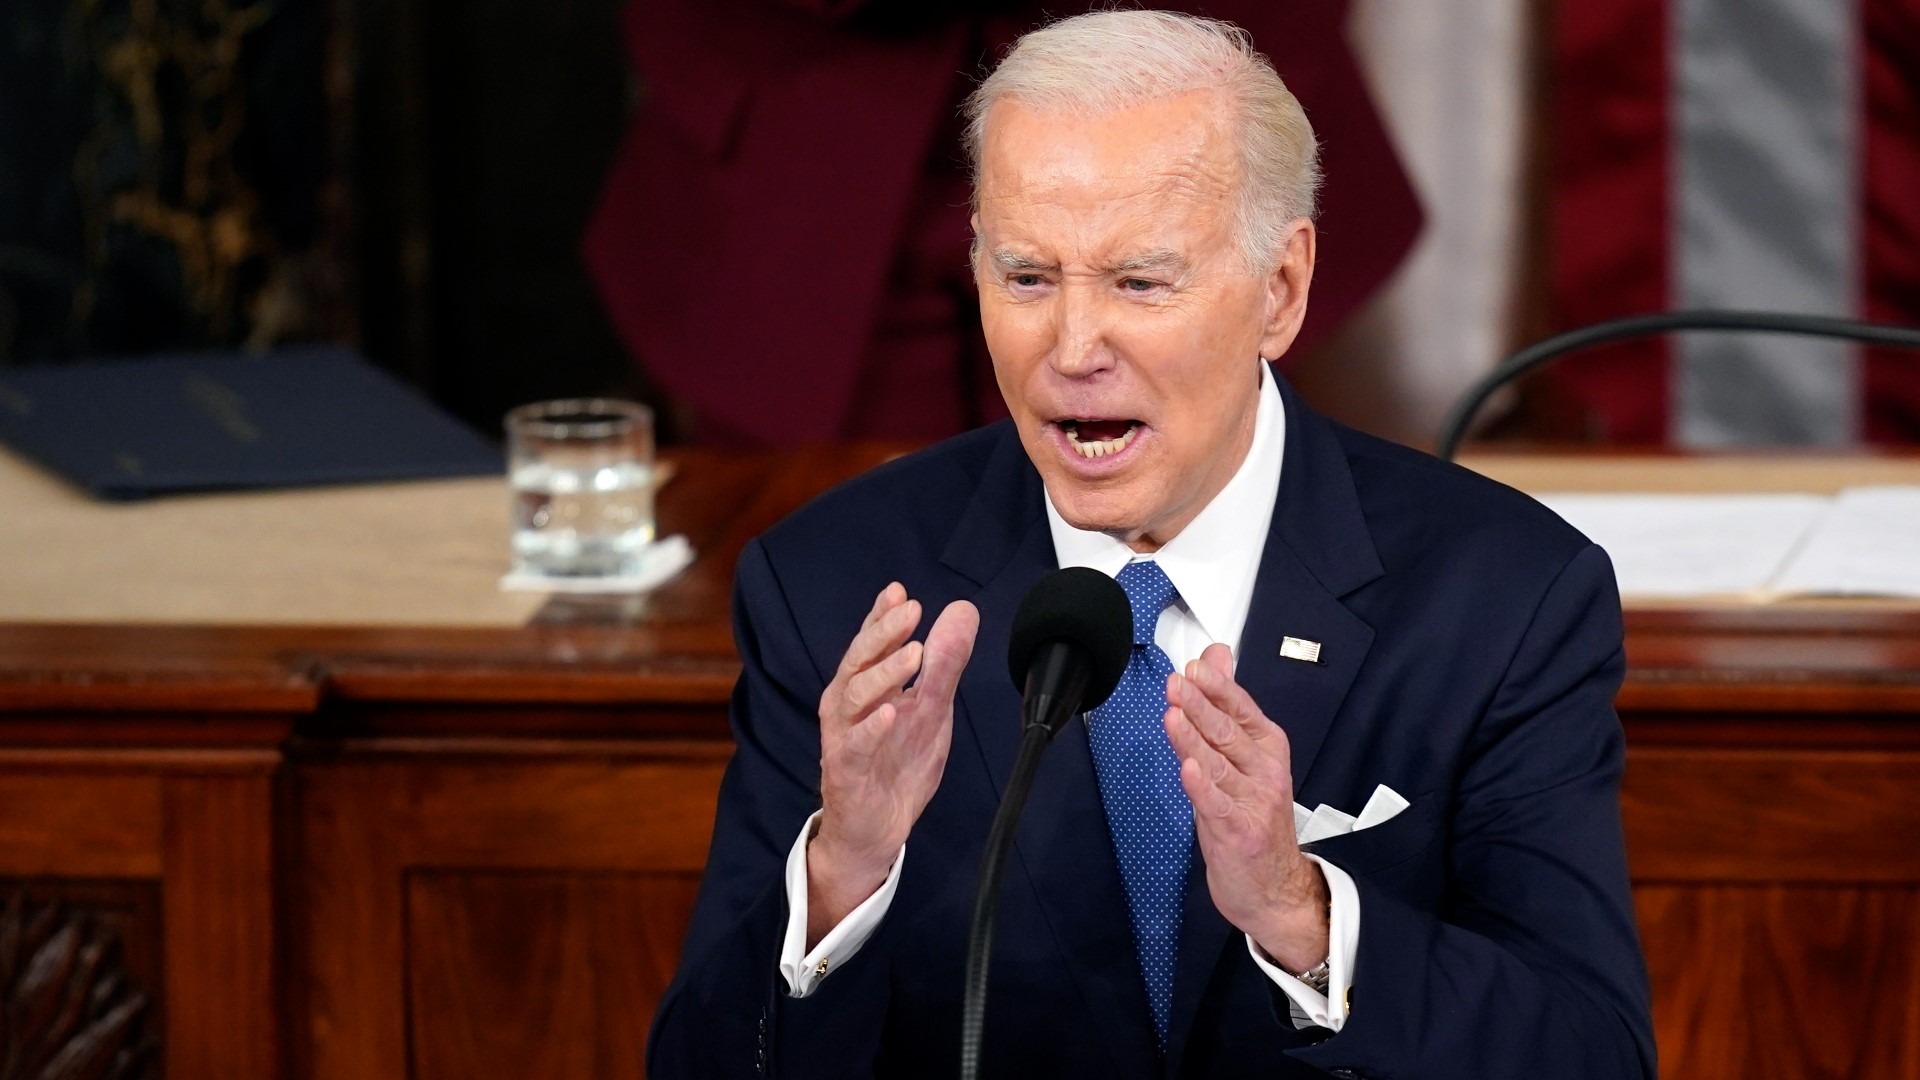 On the heels of Super Tuesday, Biden will give a closely watched State of the Union address.